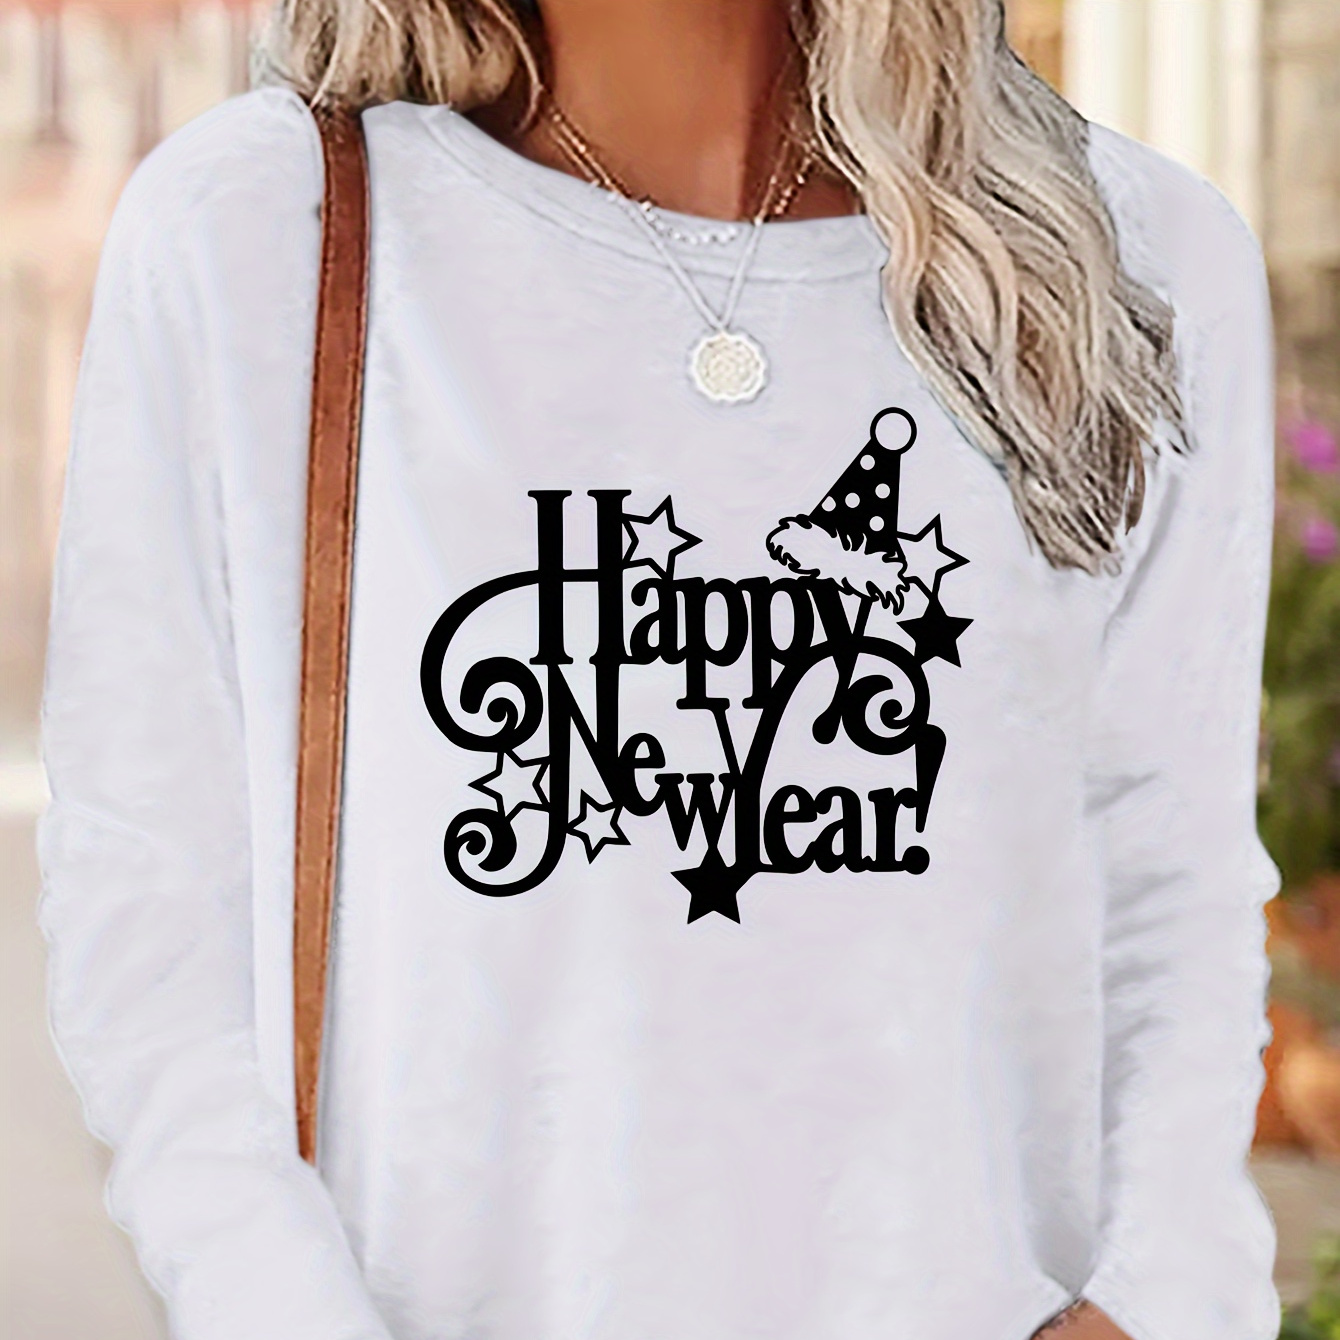 

Happy New Year Print T-shirt, Long Sleeve Crew Neck Casual Top For Spring &fall. Women's Clothing